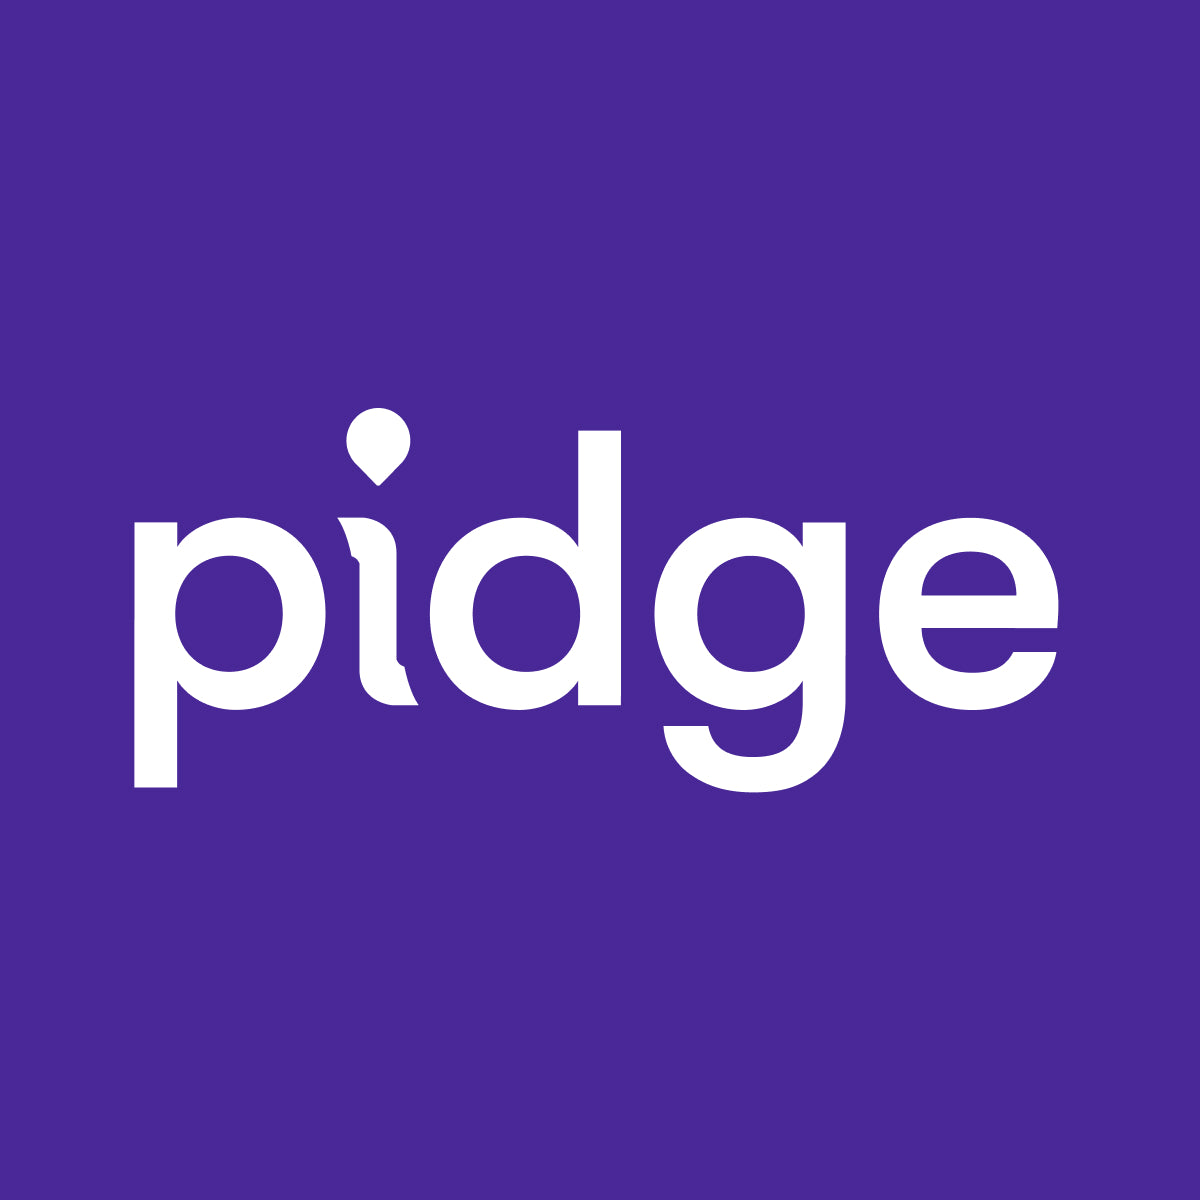 Pidge for Shopify